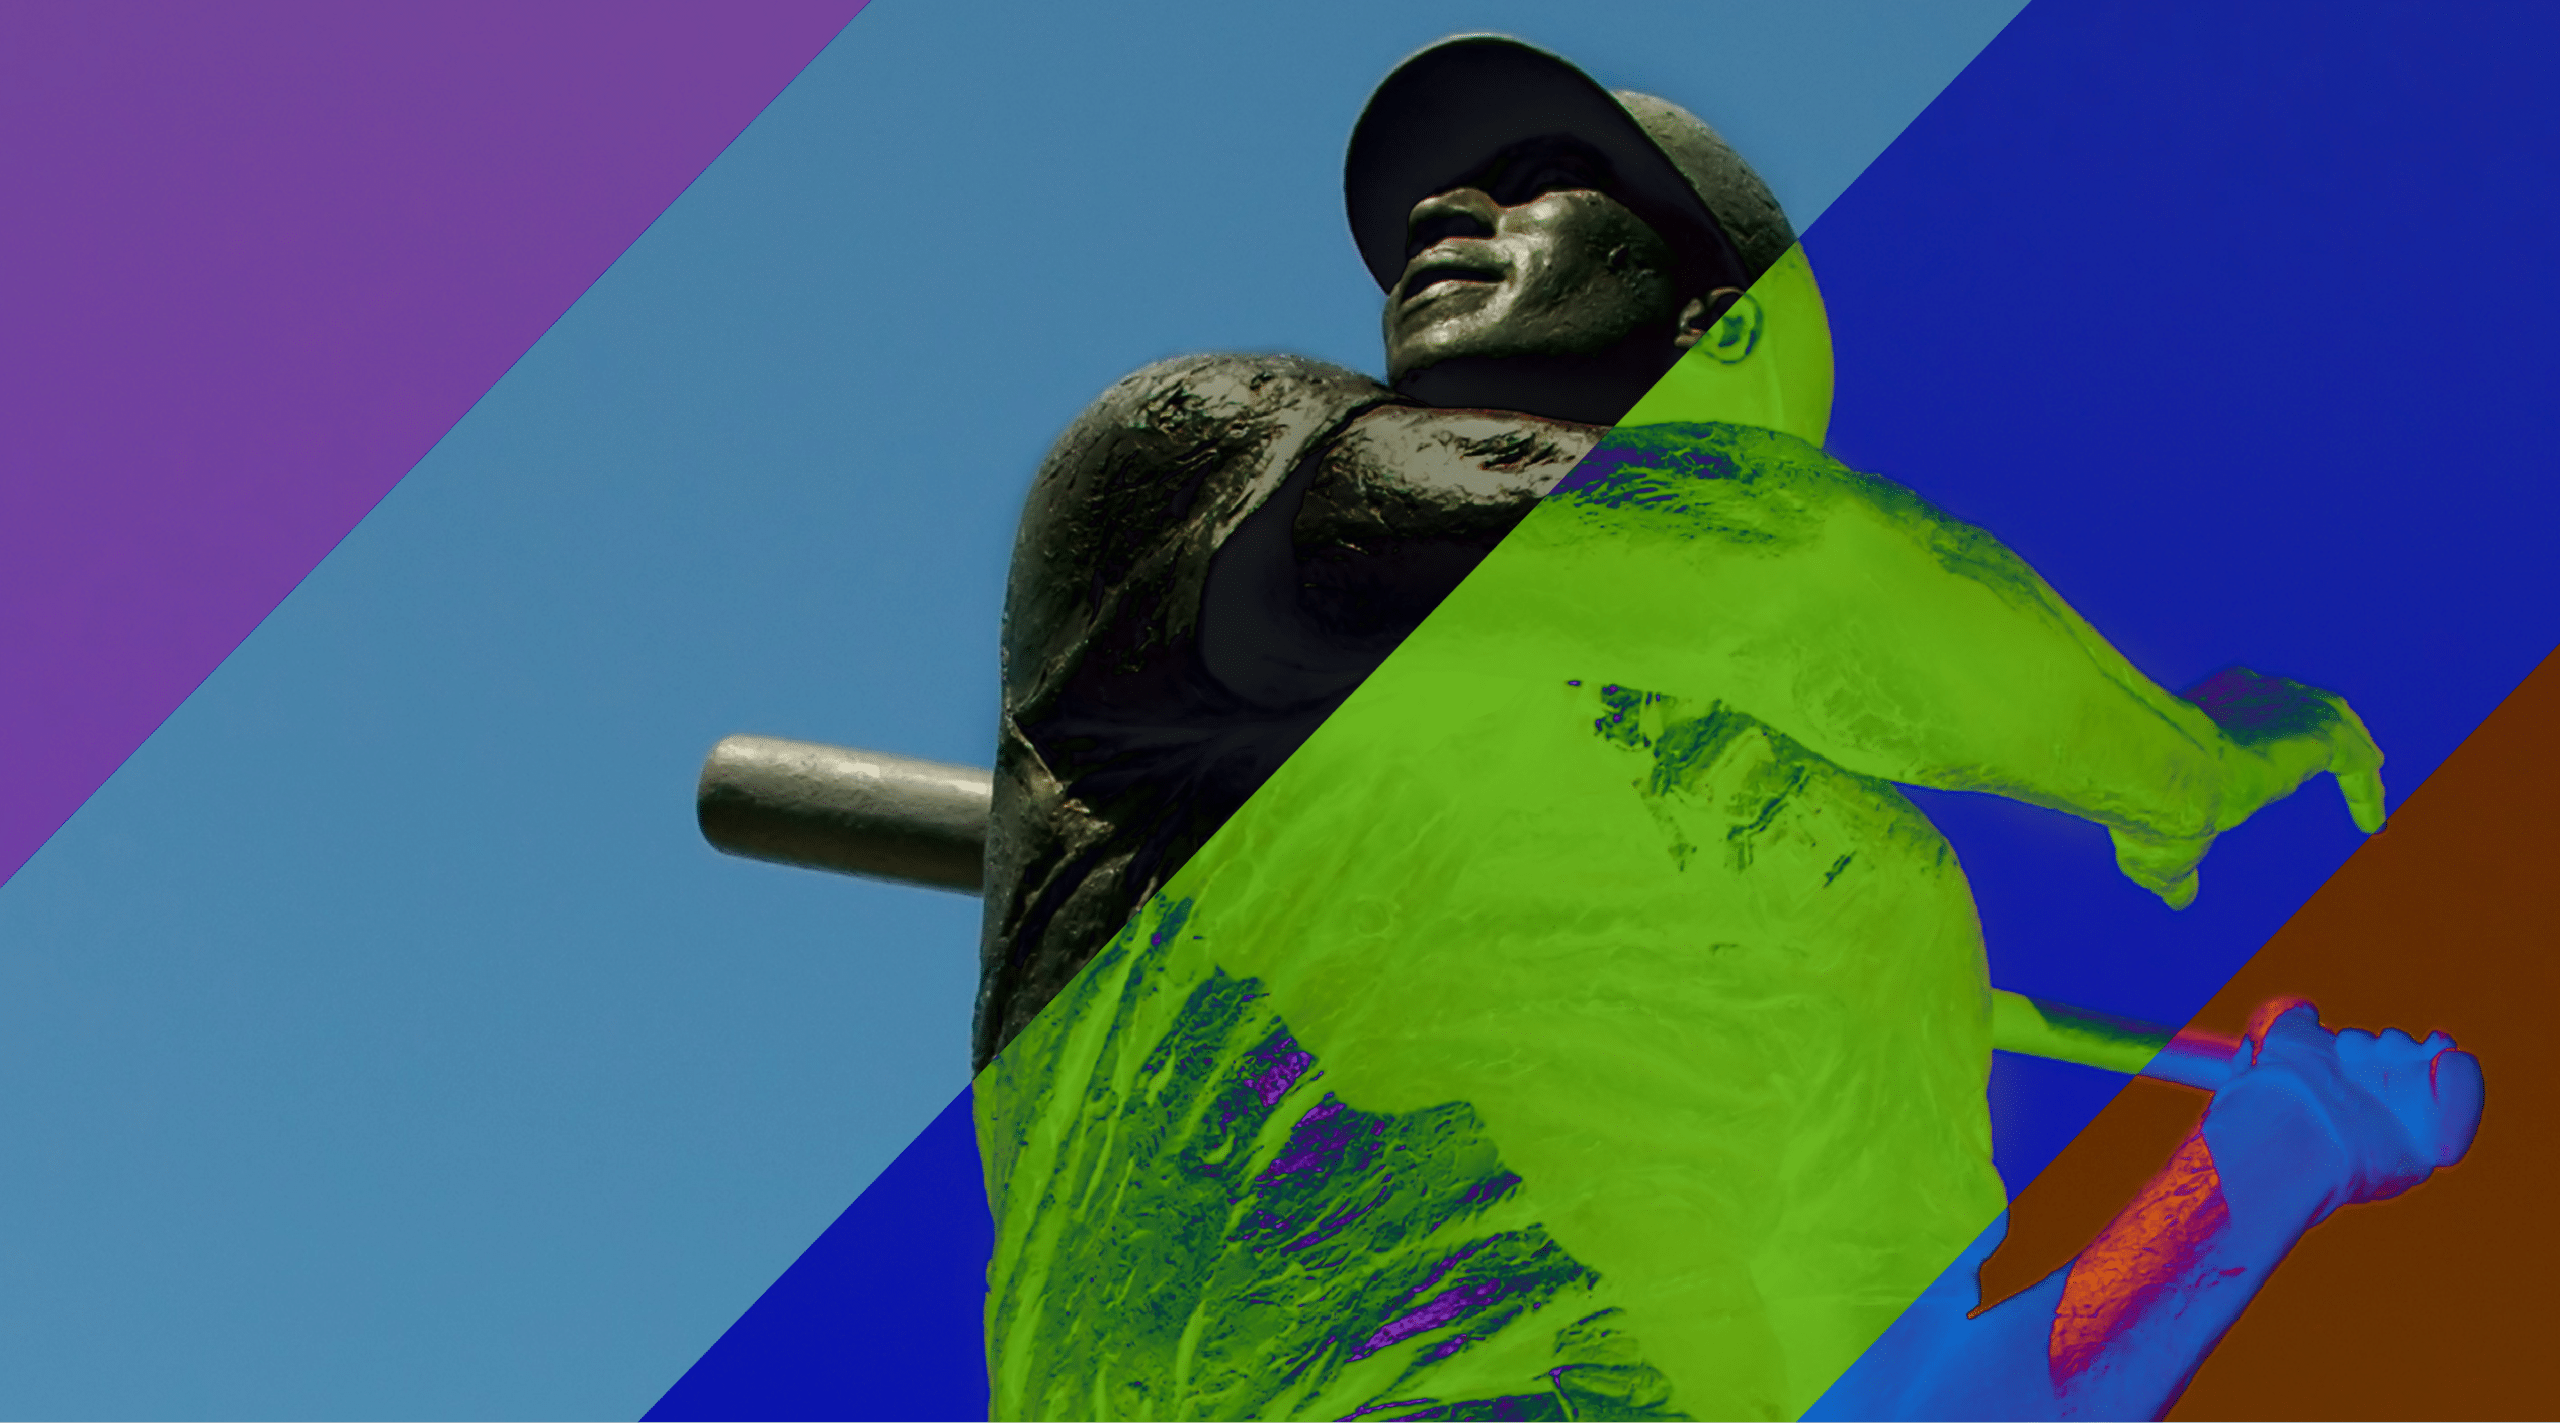 Statue of a baseball player overlaid with a multicolored, semi-transparent geometric pattern, designed to guarantee customer happiness.